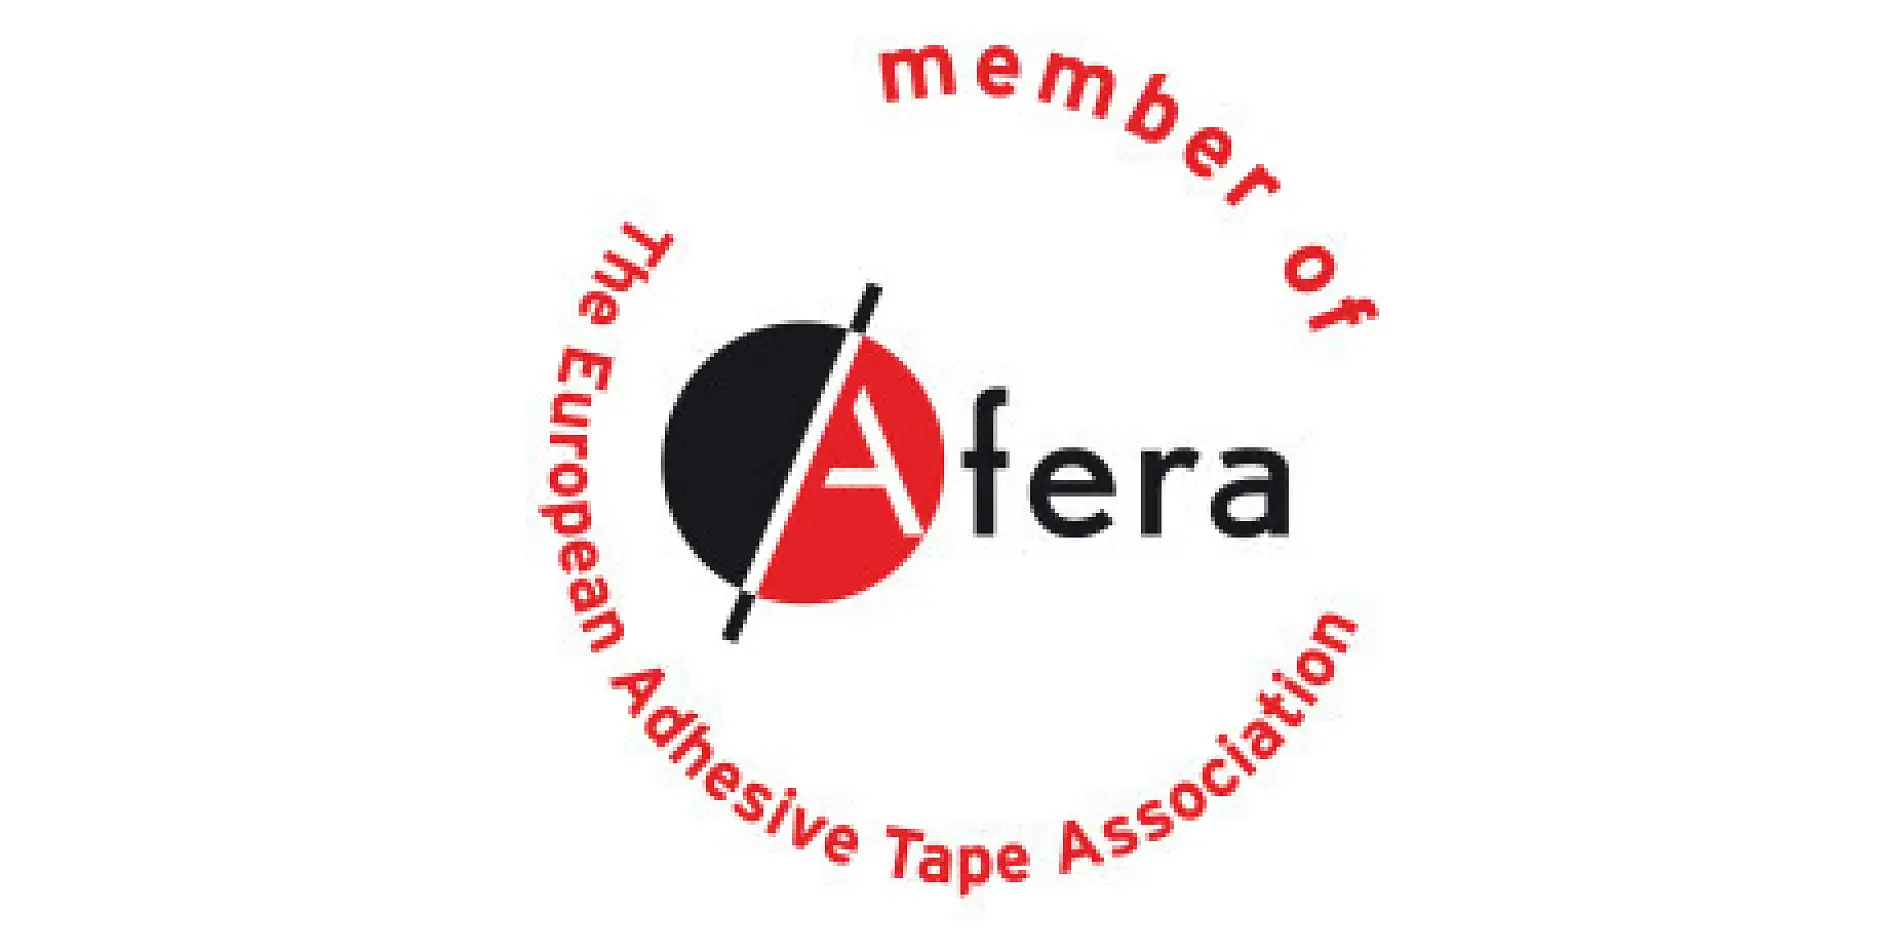 tesa is member of Afera - the European Adhesive Tape Association. The membership includes manufacturers, raw materials and machine suppliers, converters (such as printers, slitters, die cutters and laminators of adhesive tape) and national tape organisations.